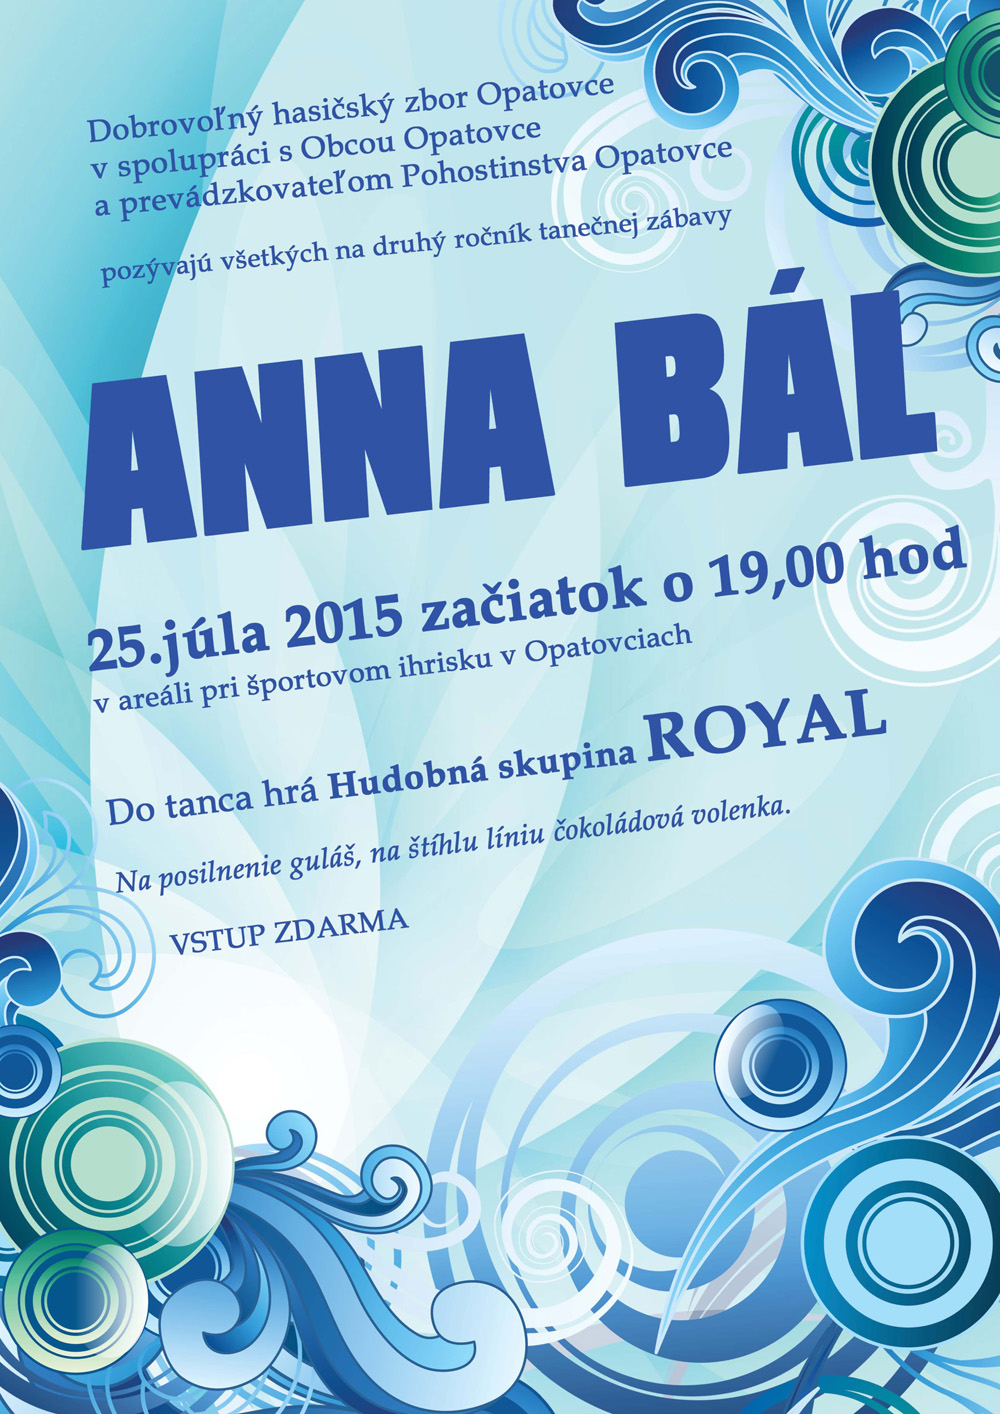 Anna bl Opatovce 2015 - 2. ronk